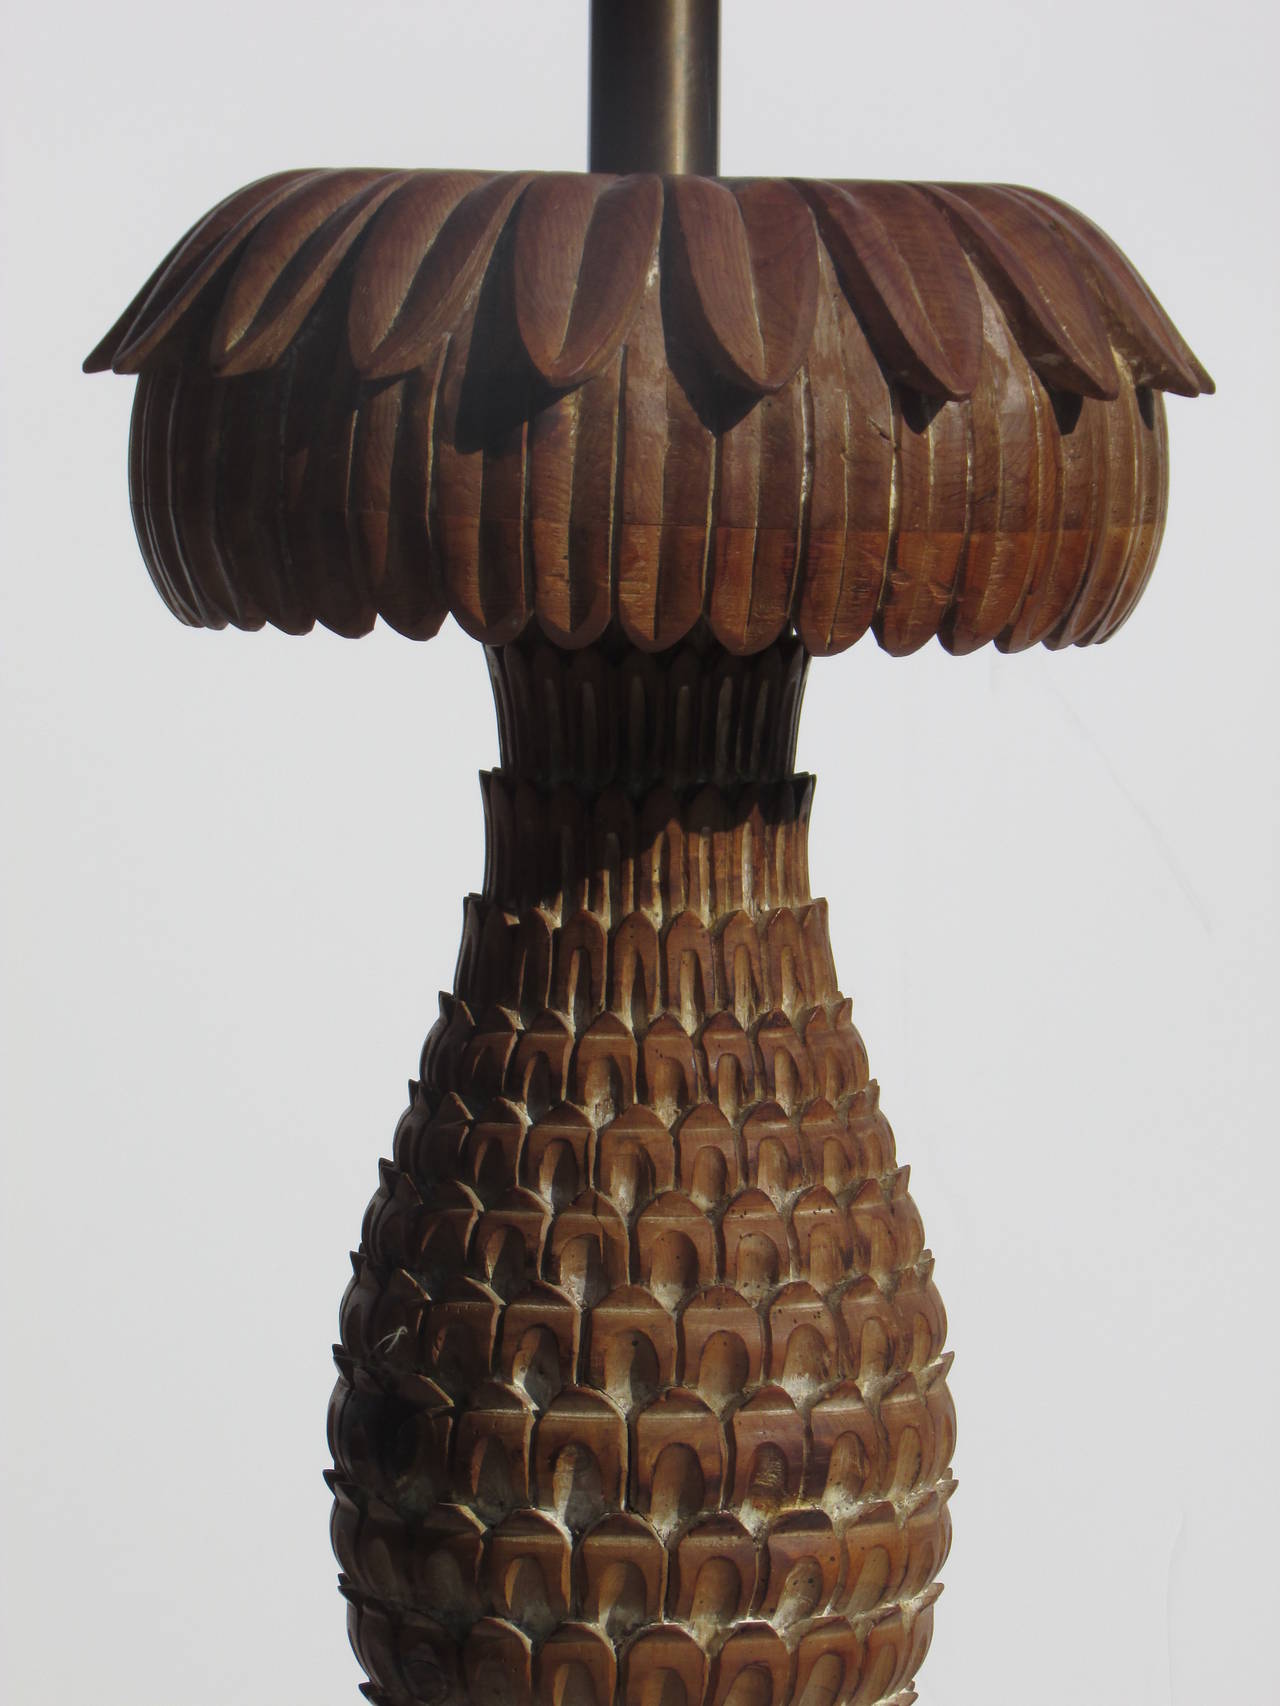 An exceptionally beautiful carved wood pineapple bromeliad table or floor lamp by Marbro with perfectly aged all original surface to wood. Retains the Marbro Original silver foil label at top of central brass shaft. Measures 57 inches to top of milk